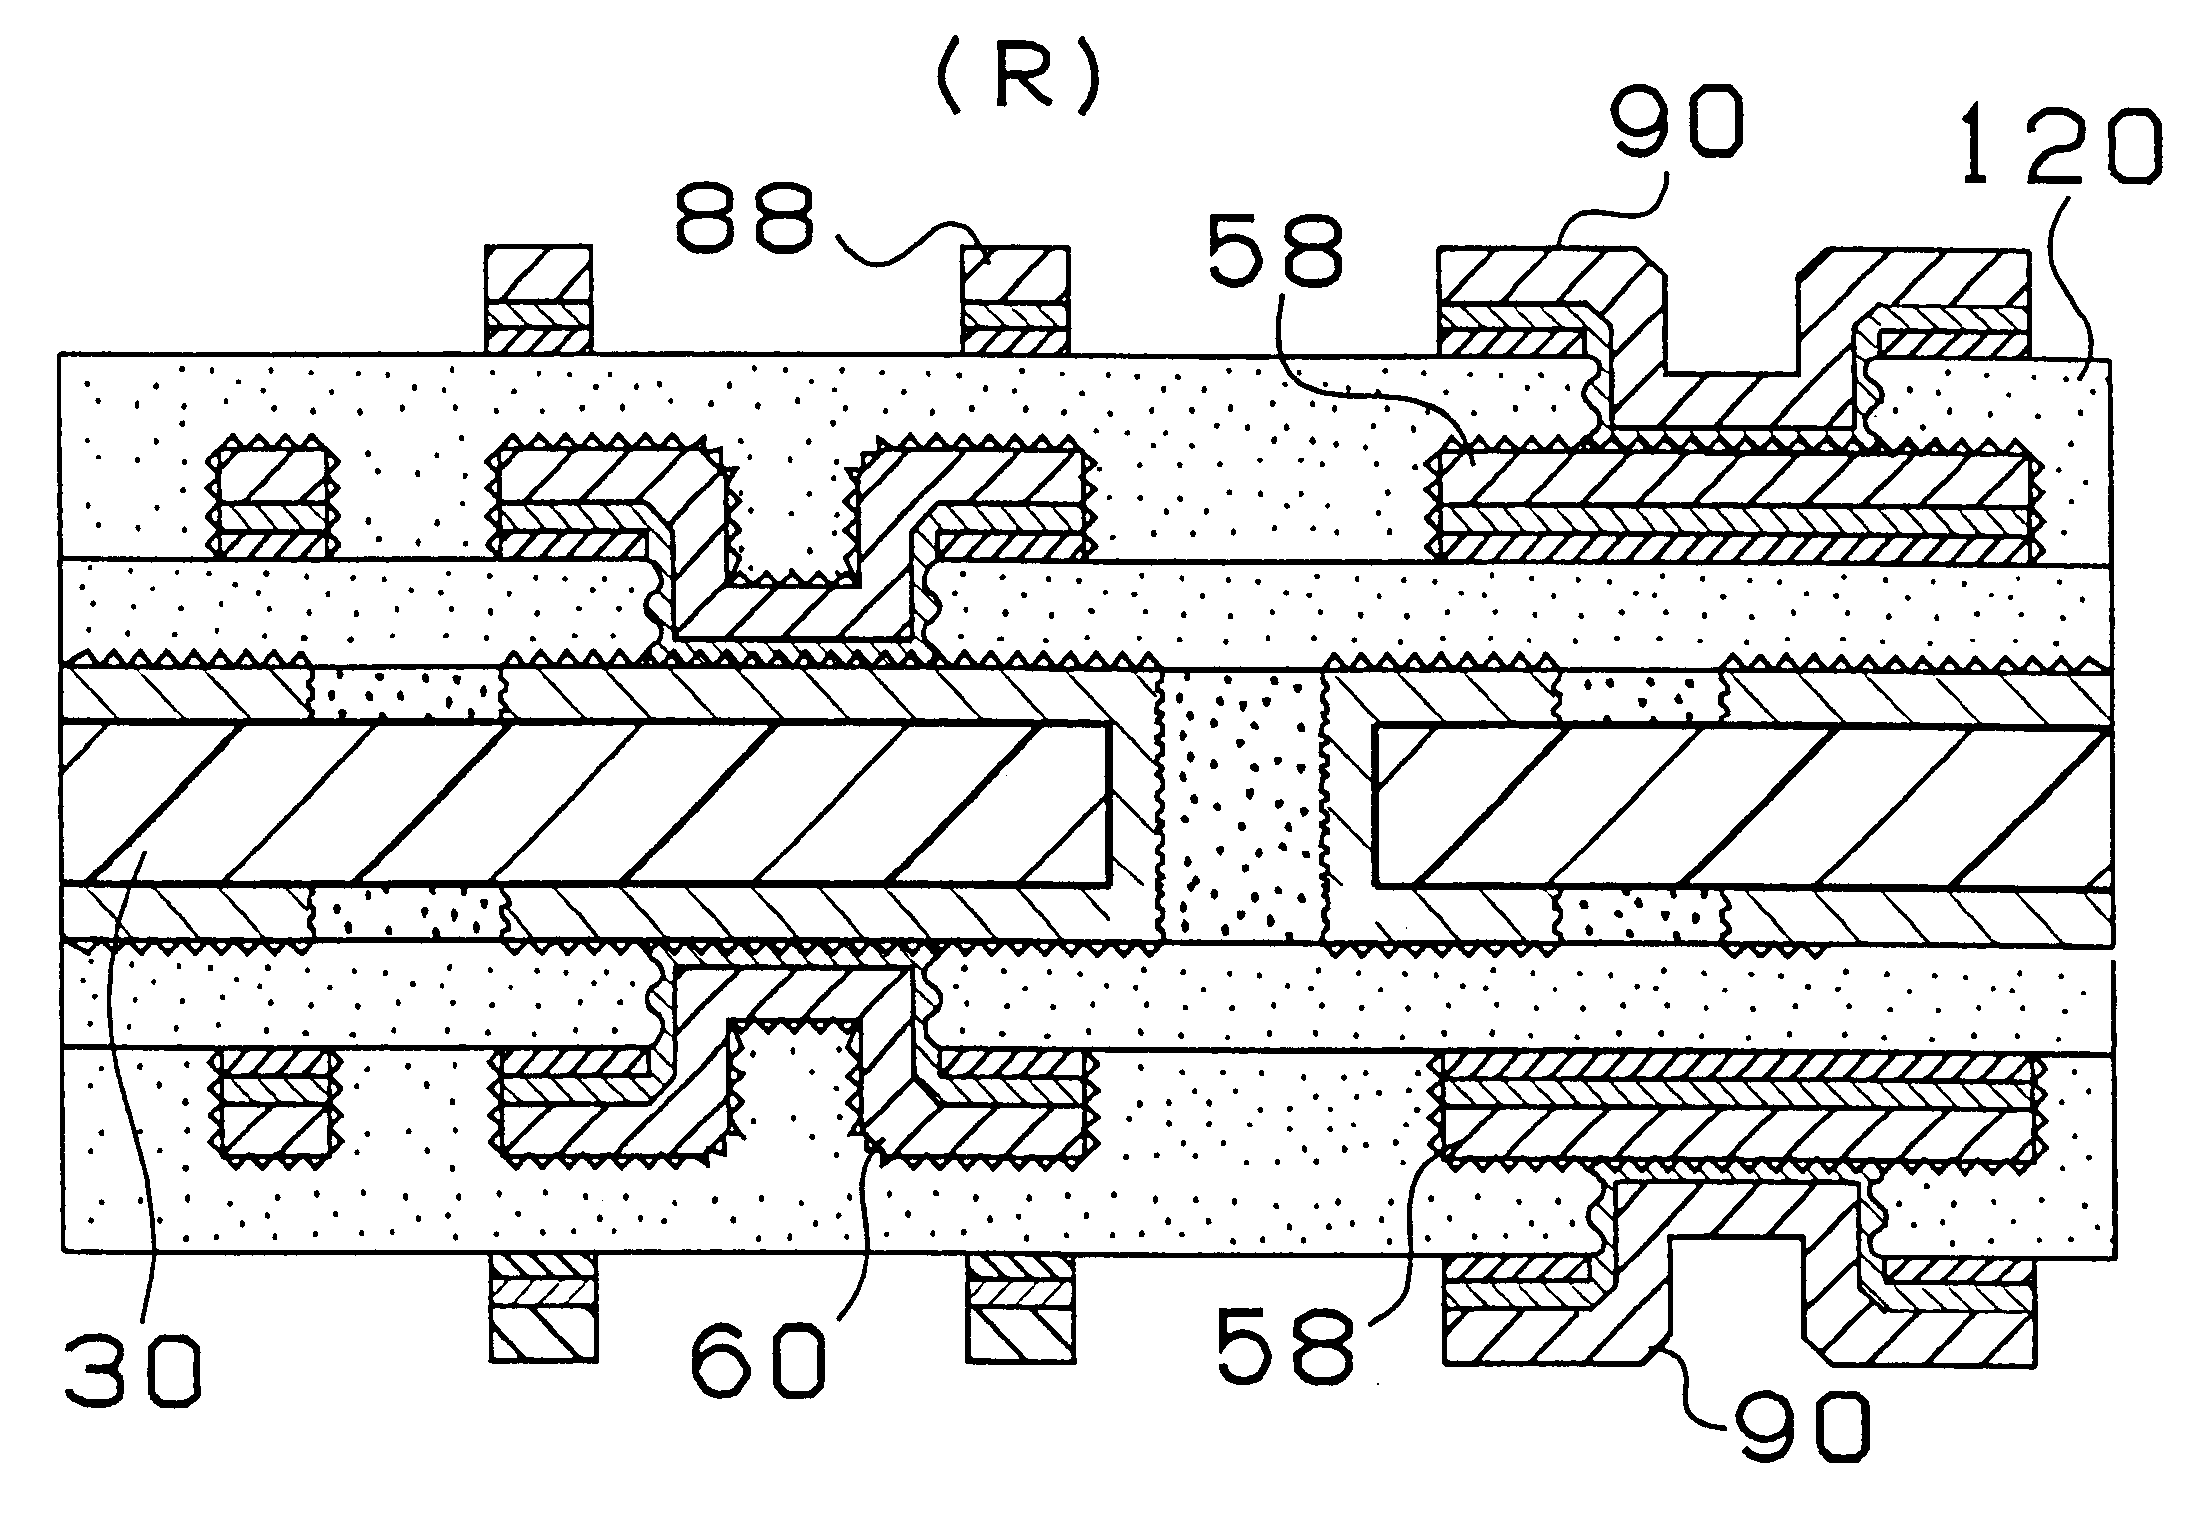 Manufacturing method of a multilayered printed circuit board having an opening made by a laser, and using electroless and electrolytic plating